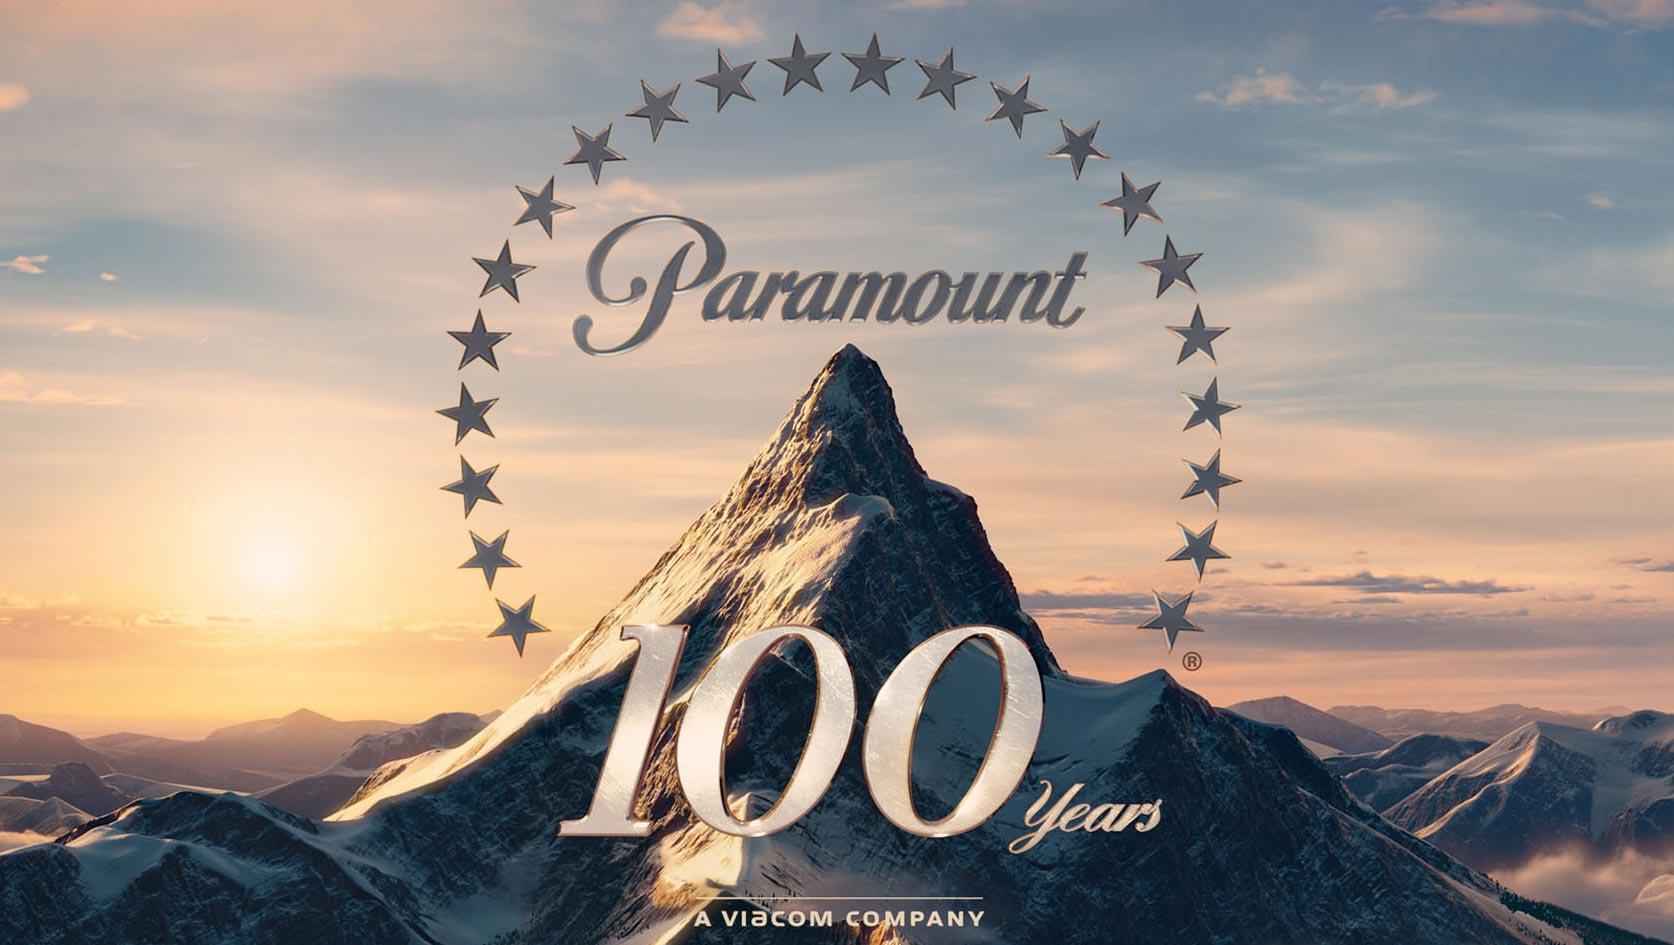 Paramount Company Logo - Paramount Picture Unveils New Logo in Celebration of the Studio's